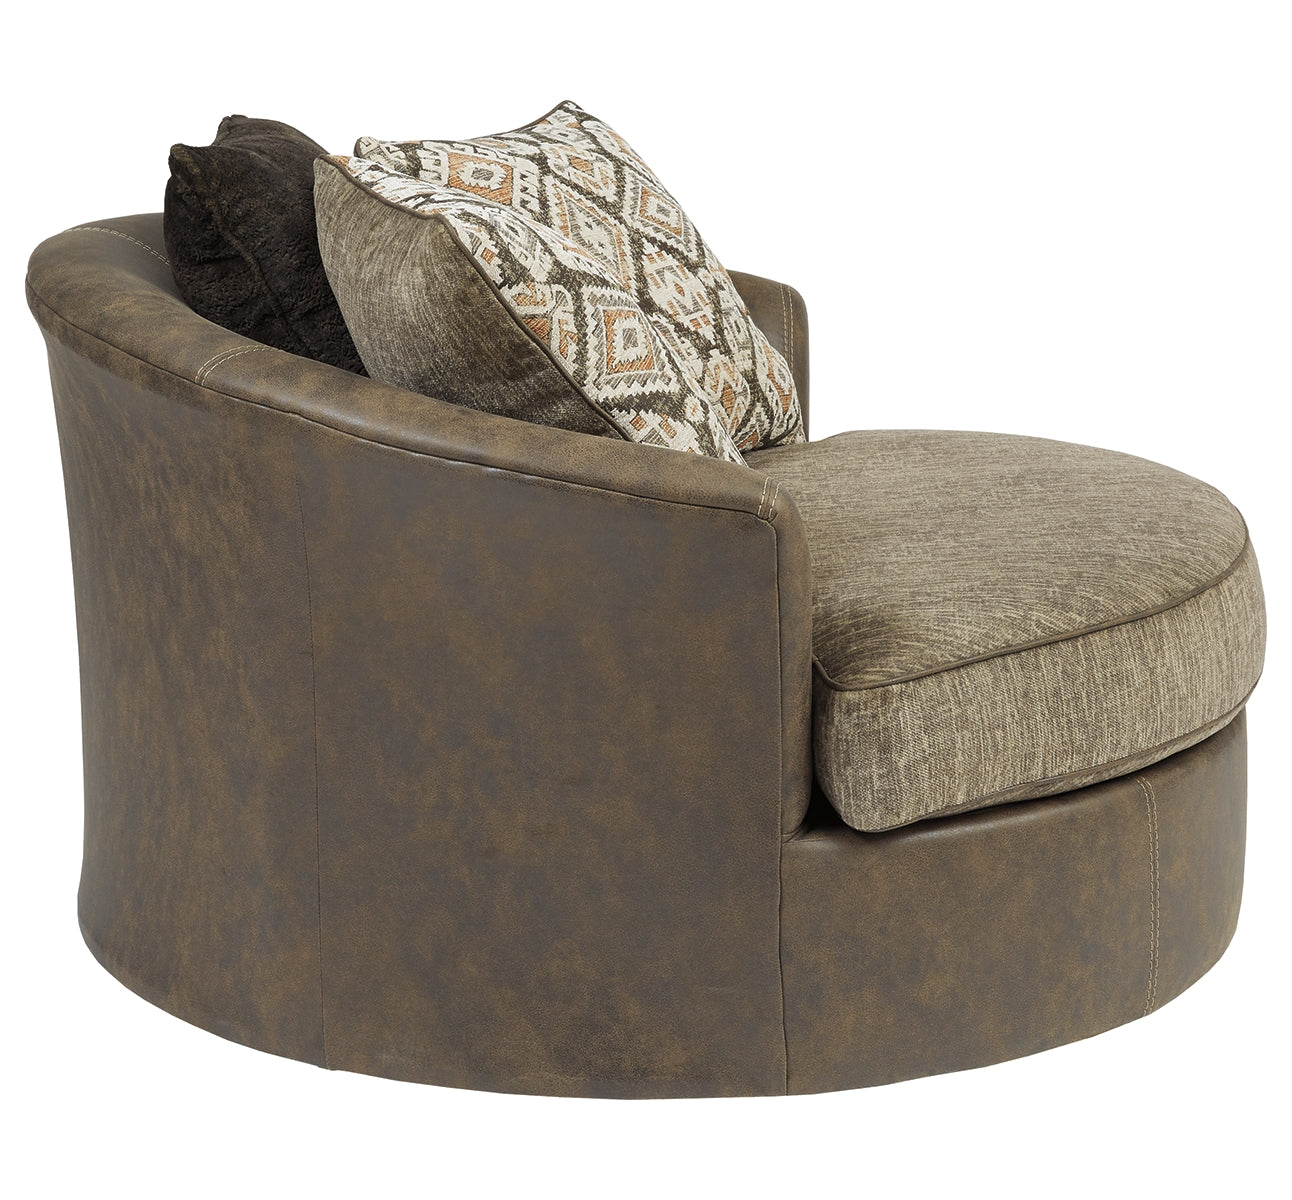 Abalone Oversized Chair